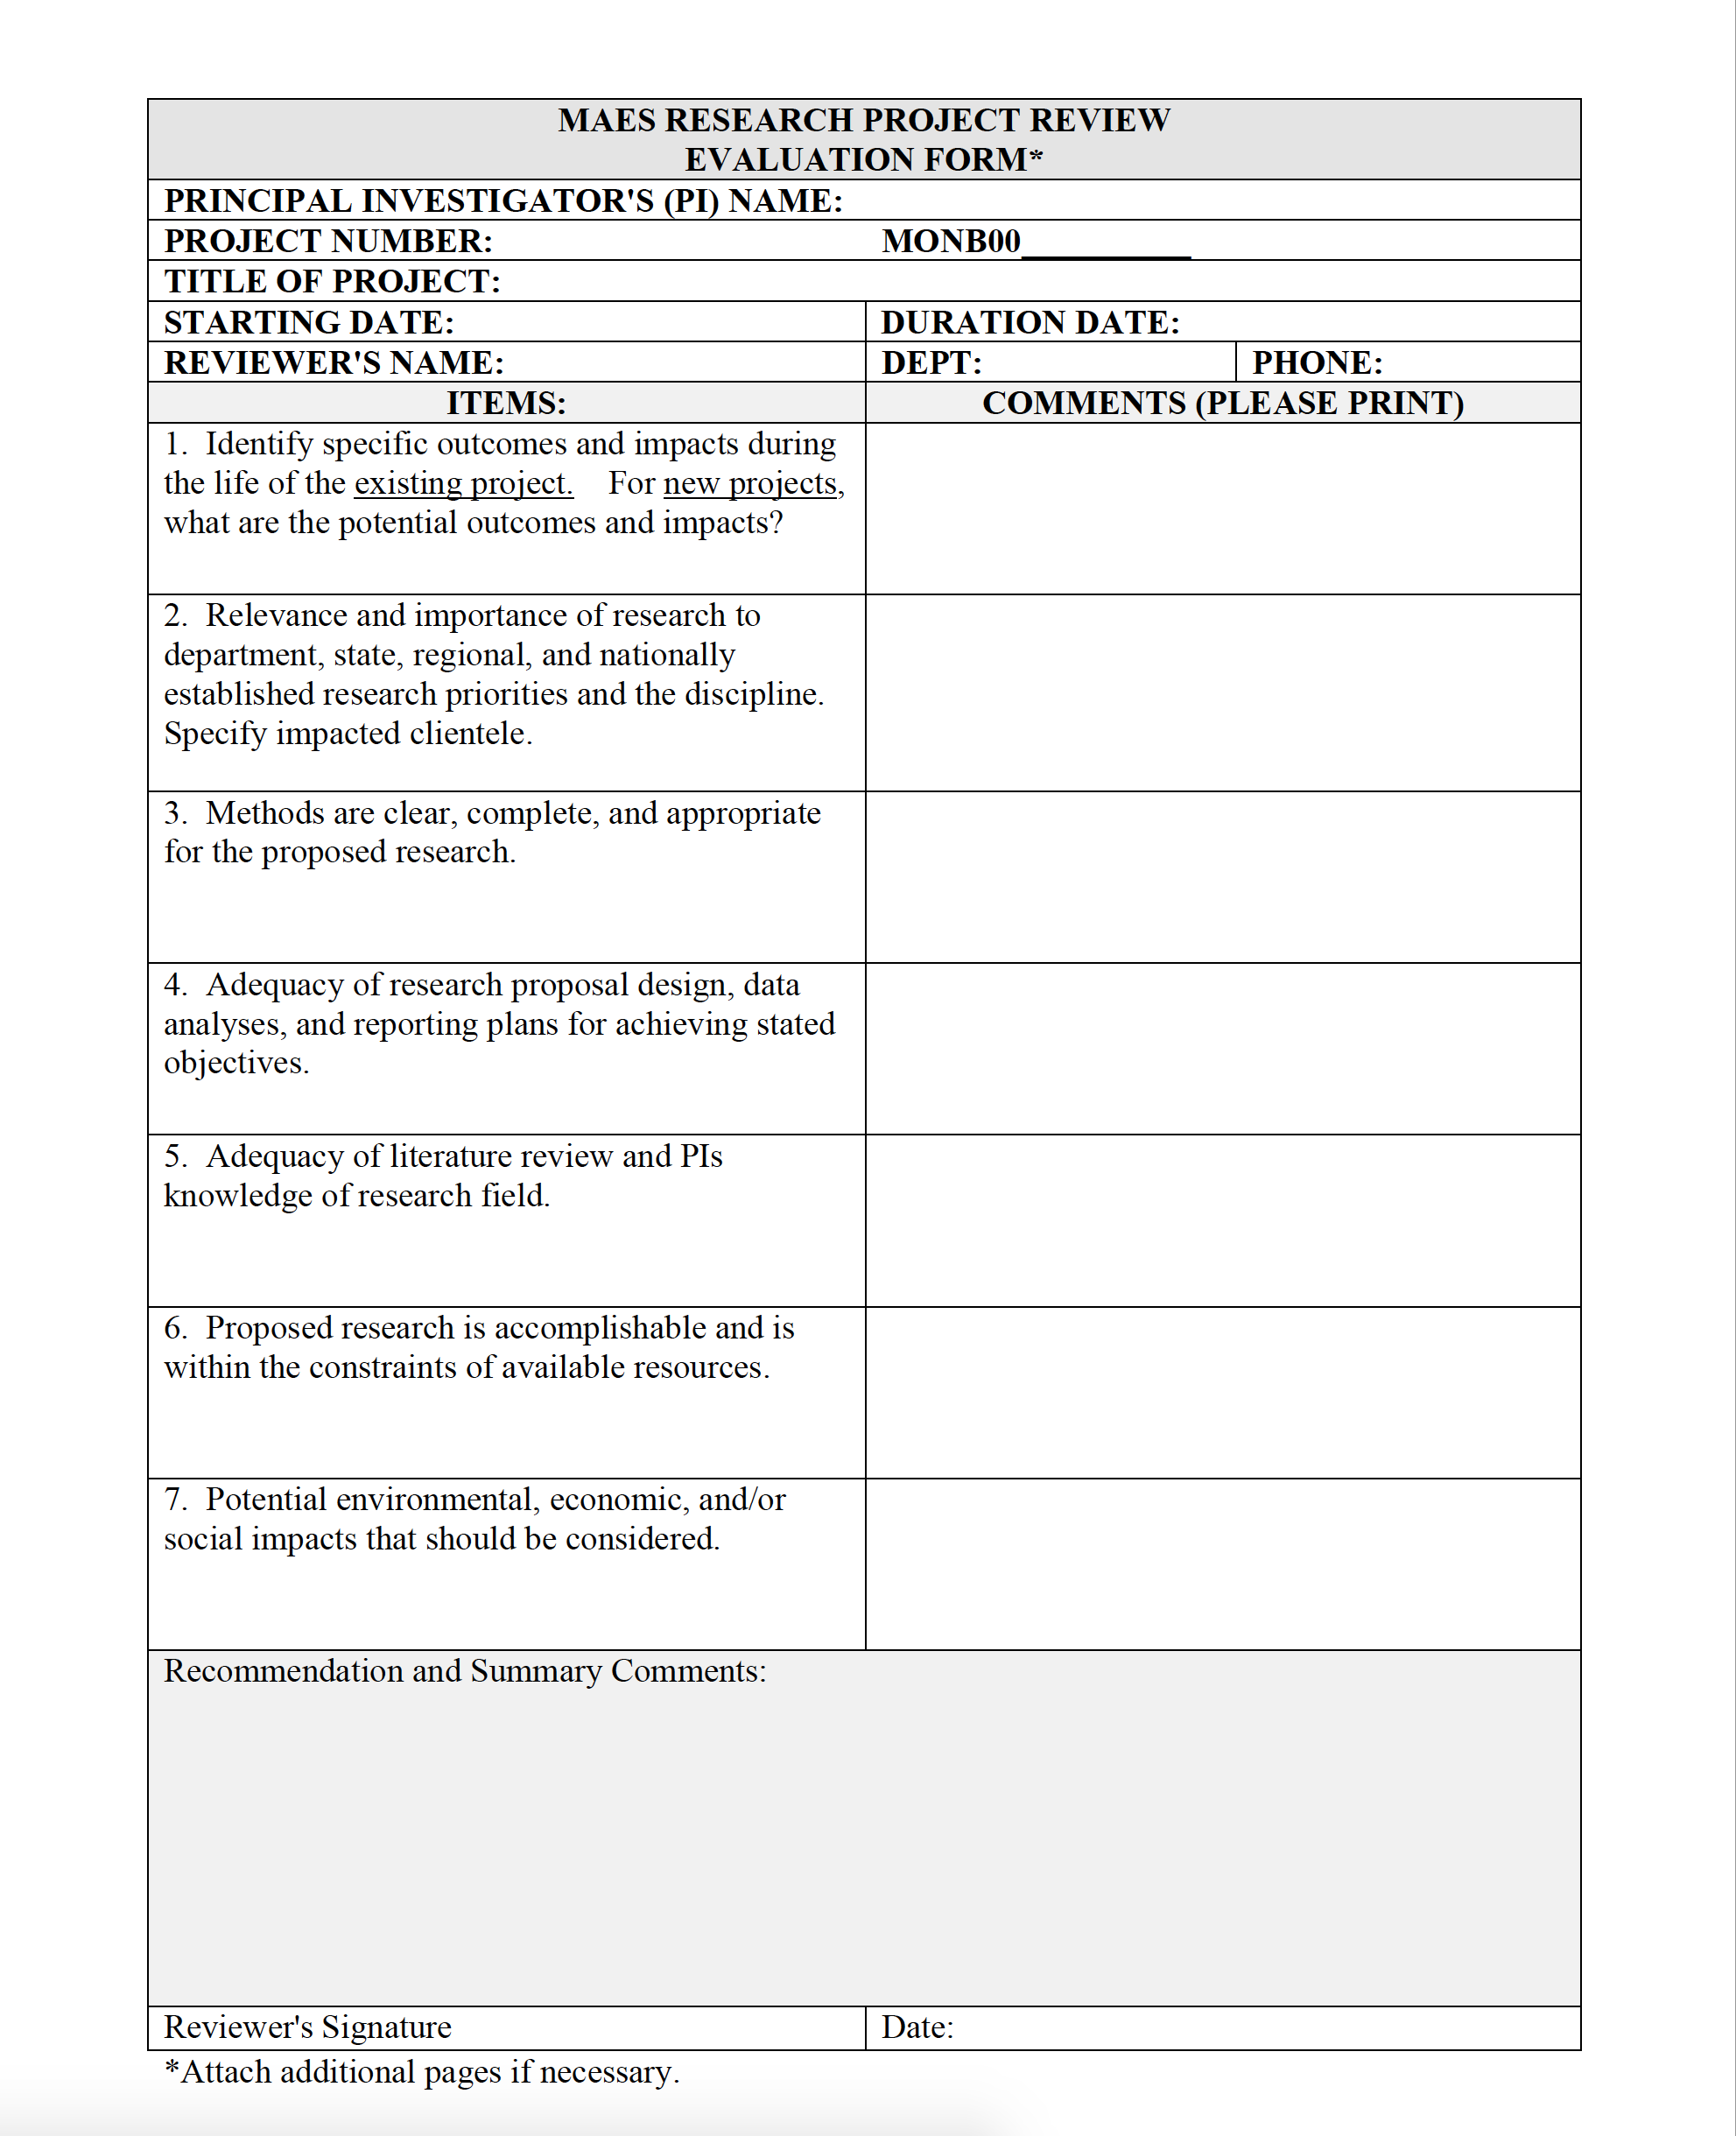 Project evaluation form